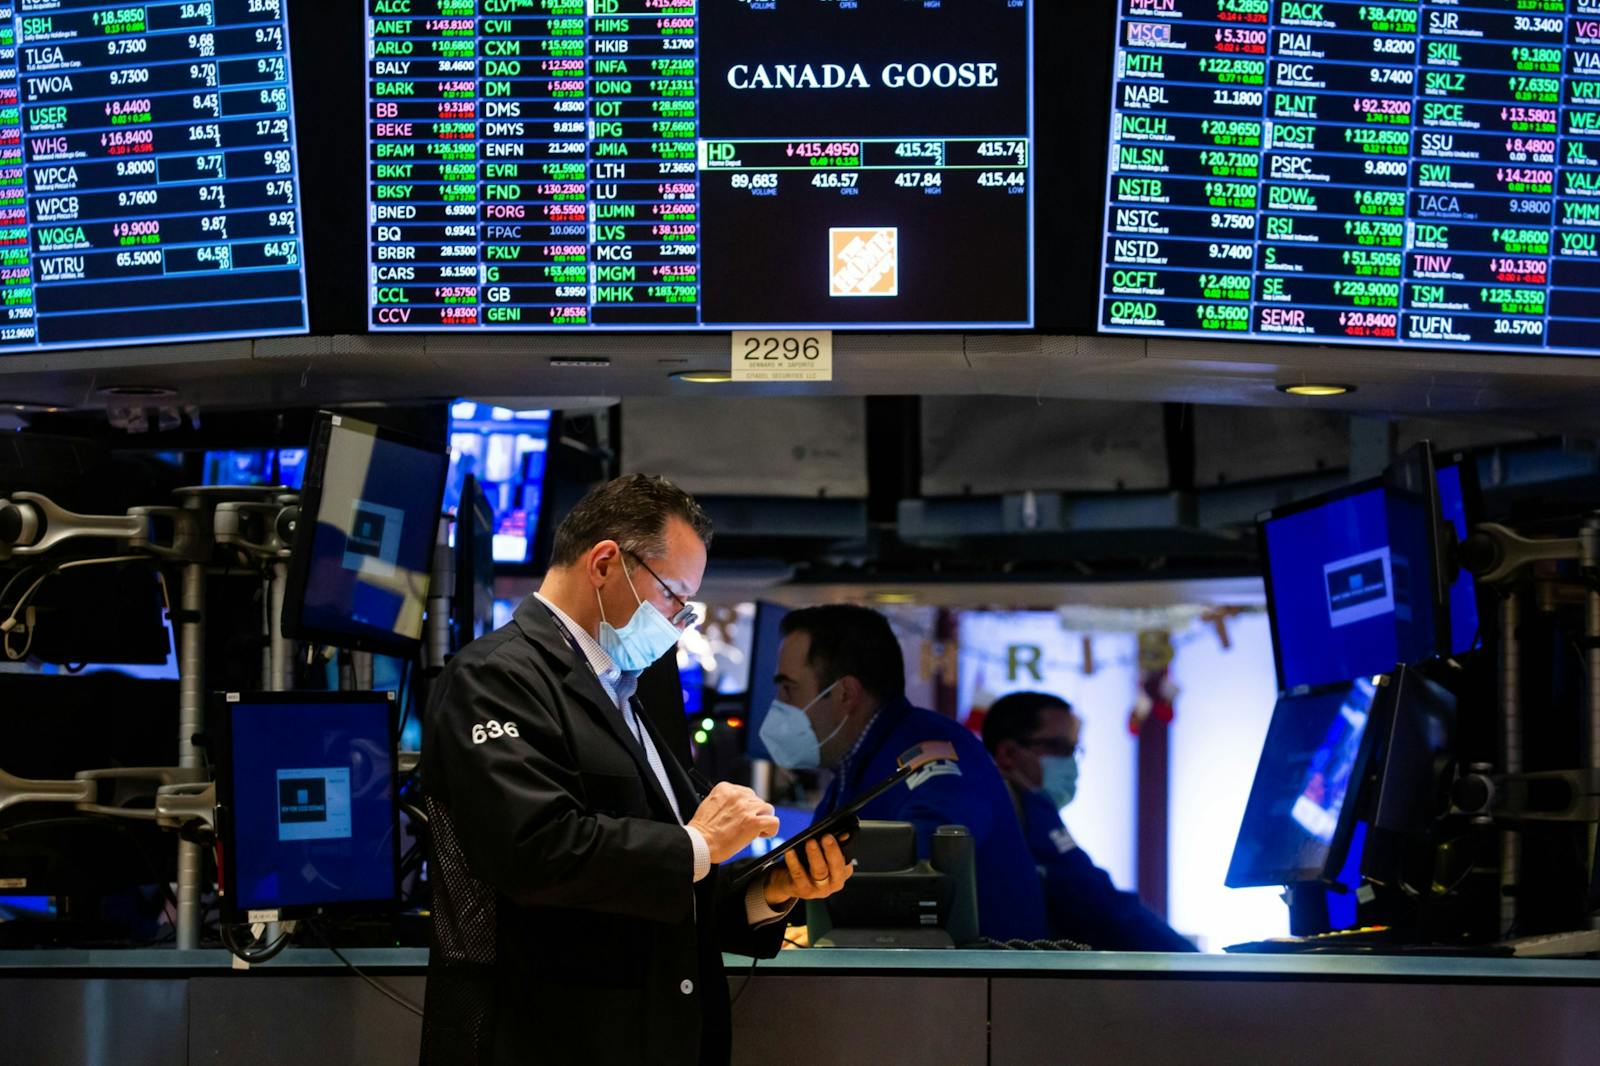 Traders on the New York Stock Exchange this week. Photo by Bloomberg.